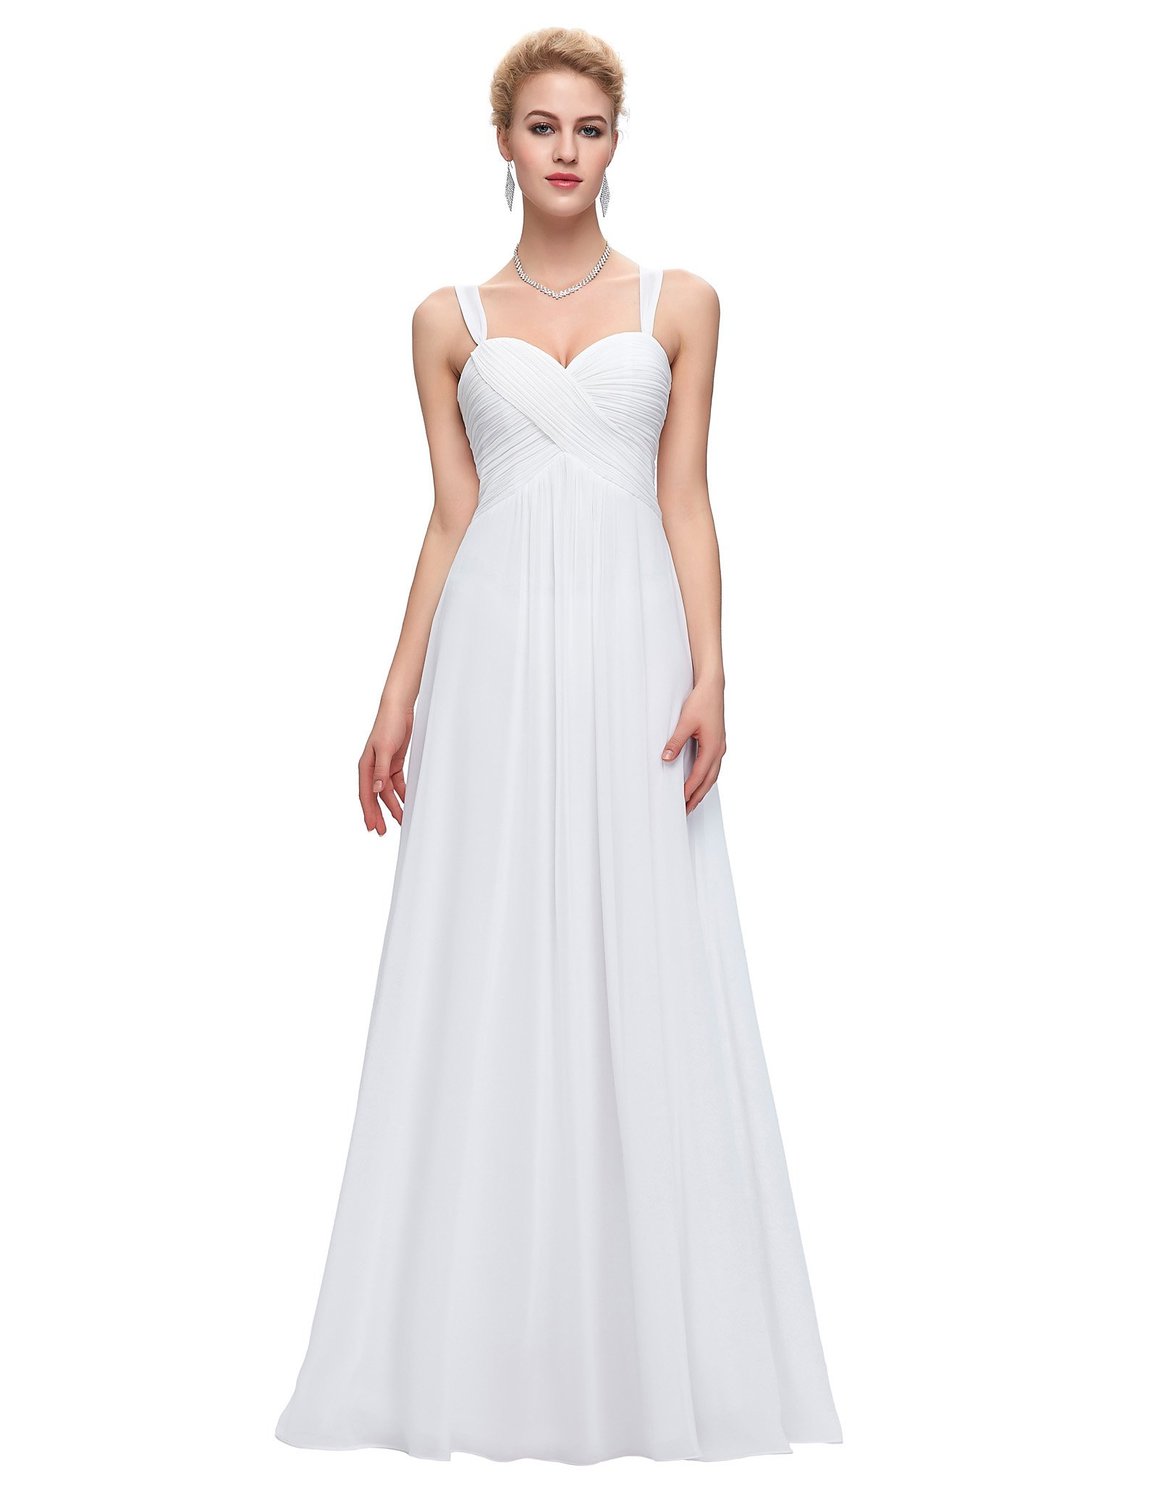 inexpensive dresses for weddings